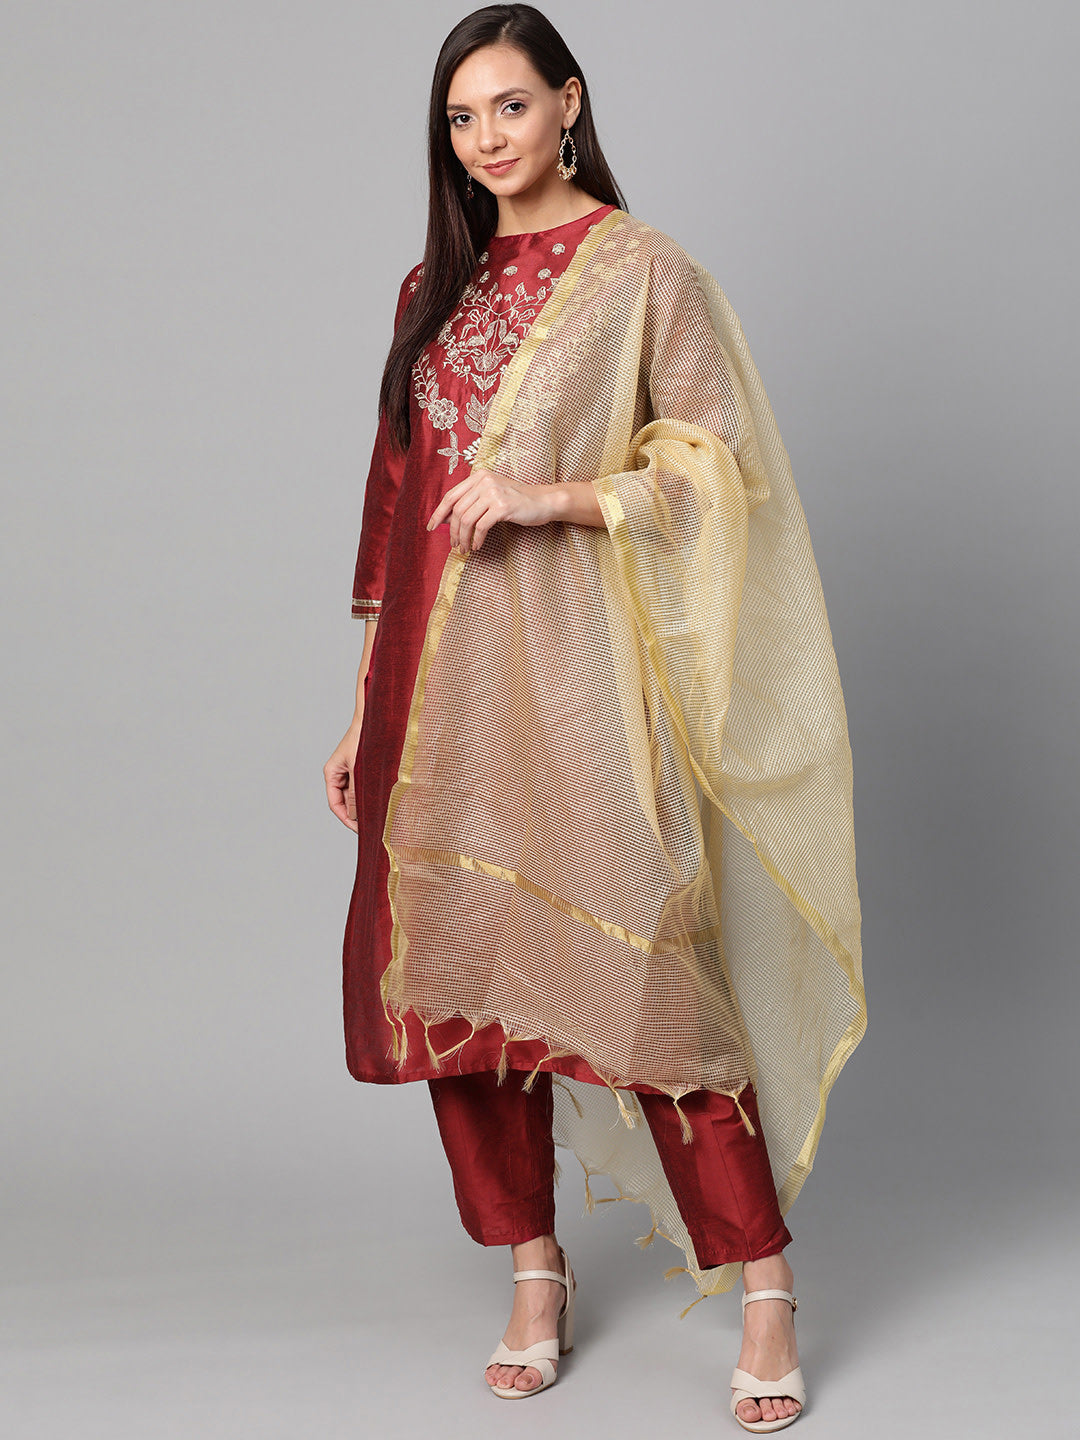 Women's Maroon And Golden Yoke Design Kurta With Trousers - Bhama Couture